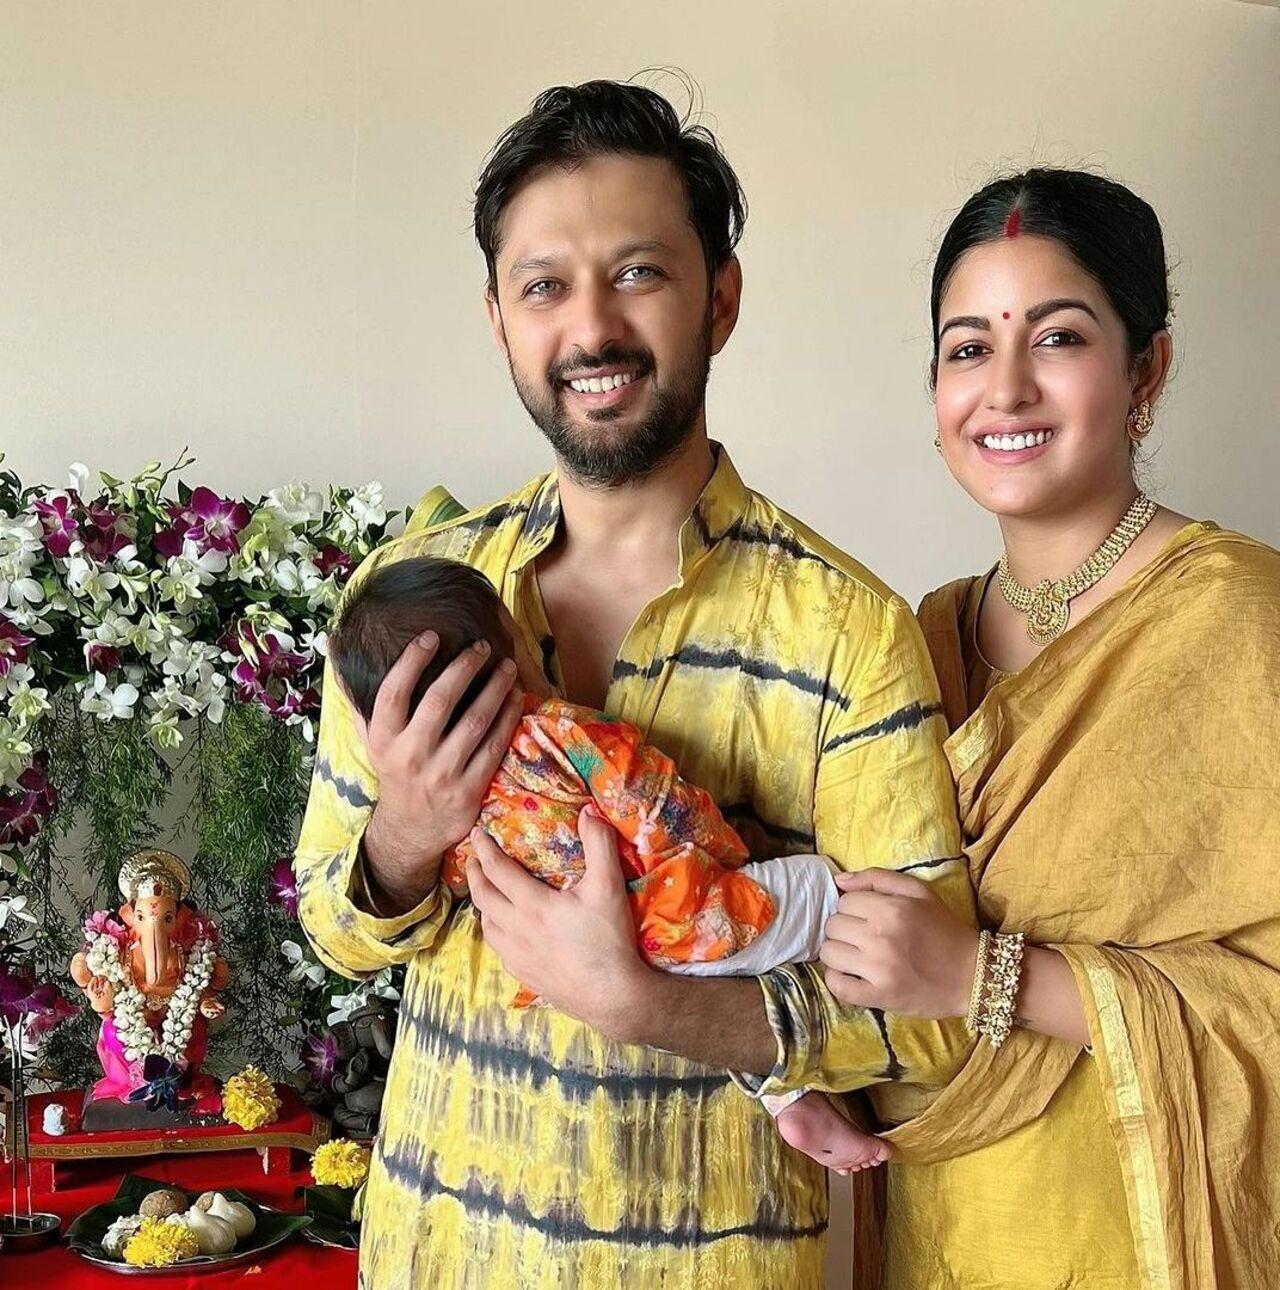 Ishita Dutta and Vatsal Sheth celebrated Ganesh Chaturthi for the first time with their son, Vaayu, who was born to them on July 20